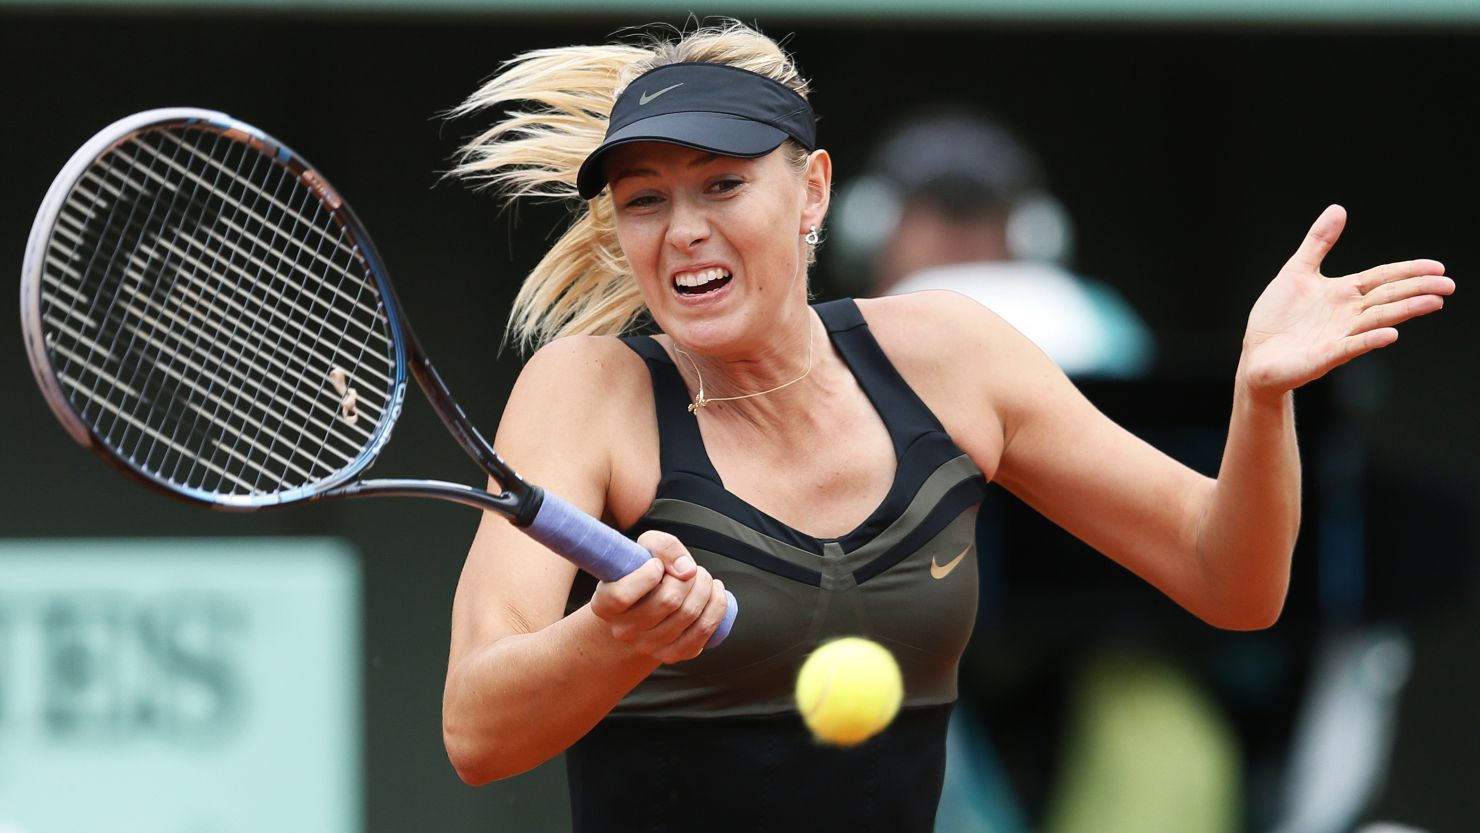 Maria Sharapova needs two more victories to win the French Open title and complete a career grand slam